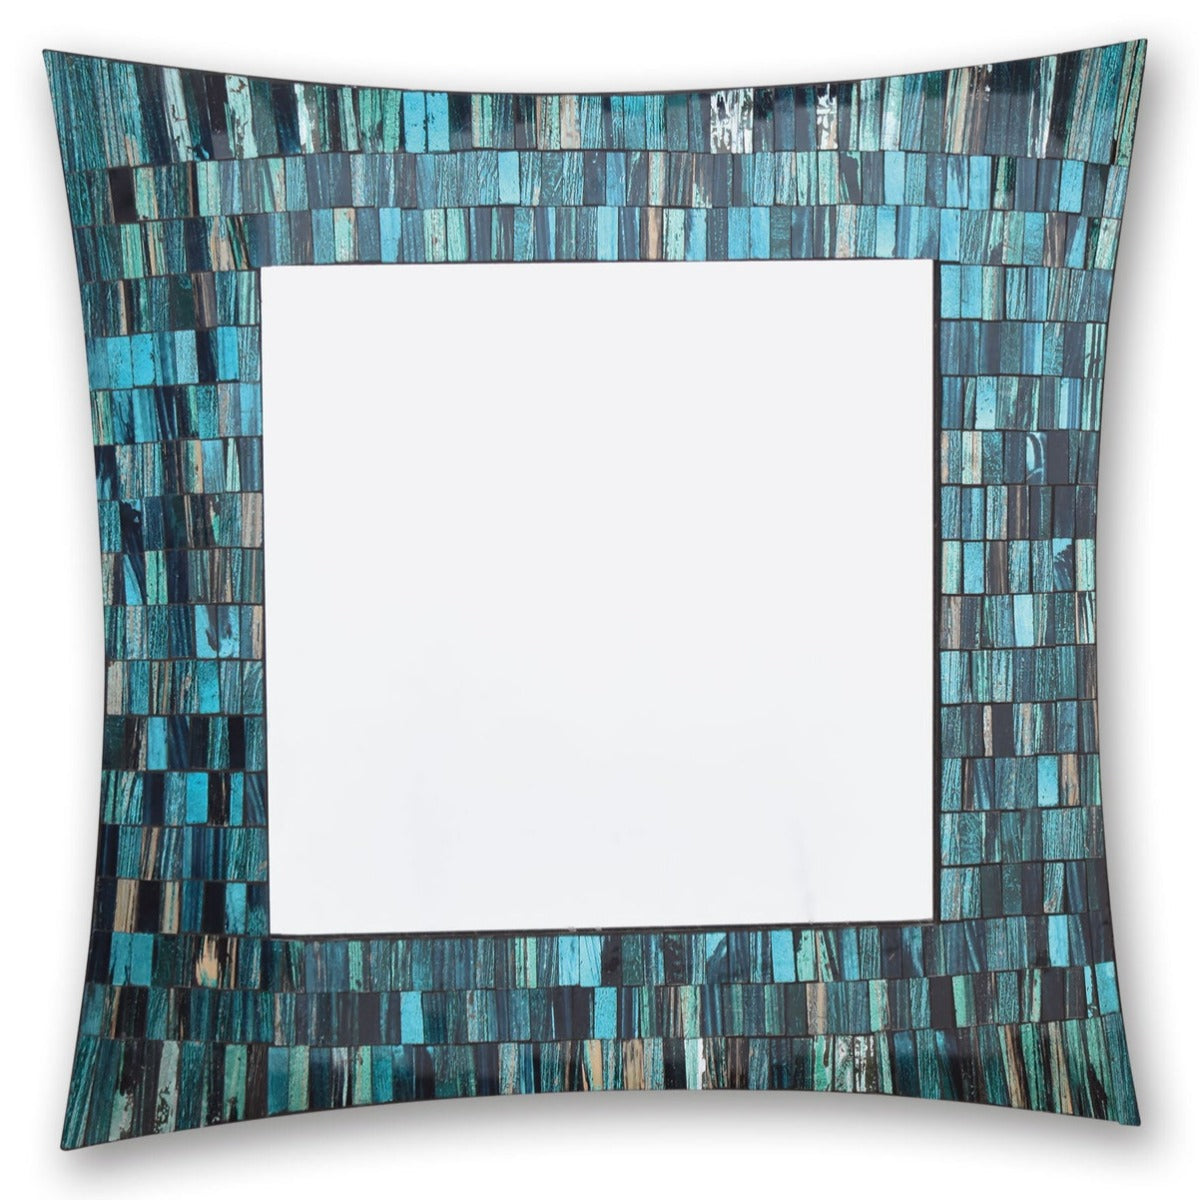 Oceans Reflections Wall Mirror